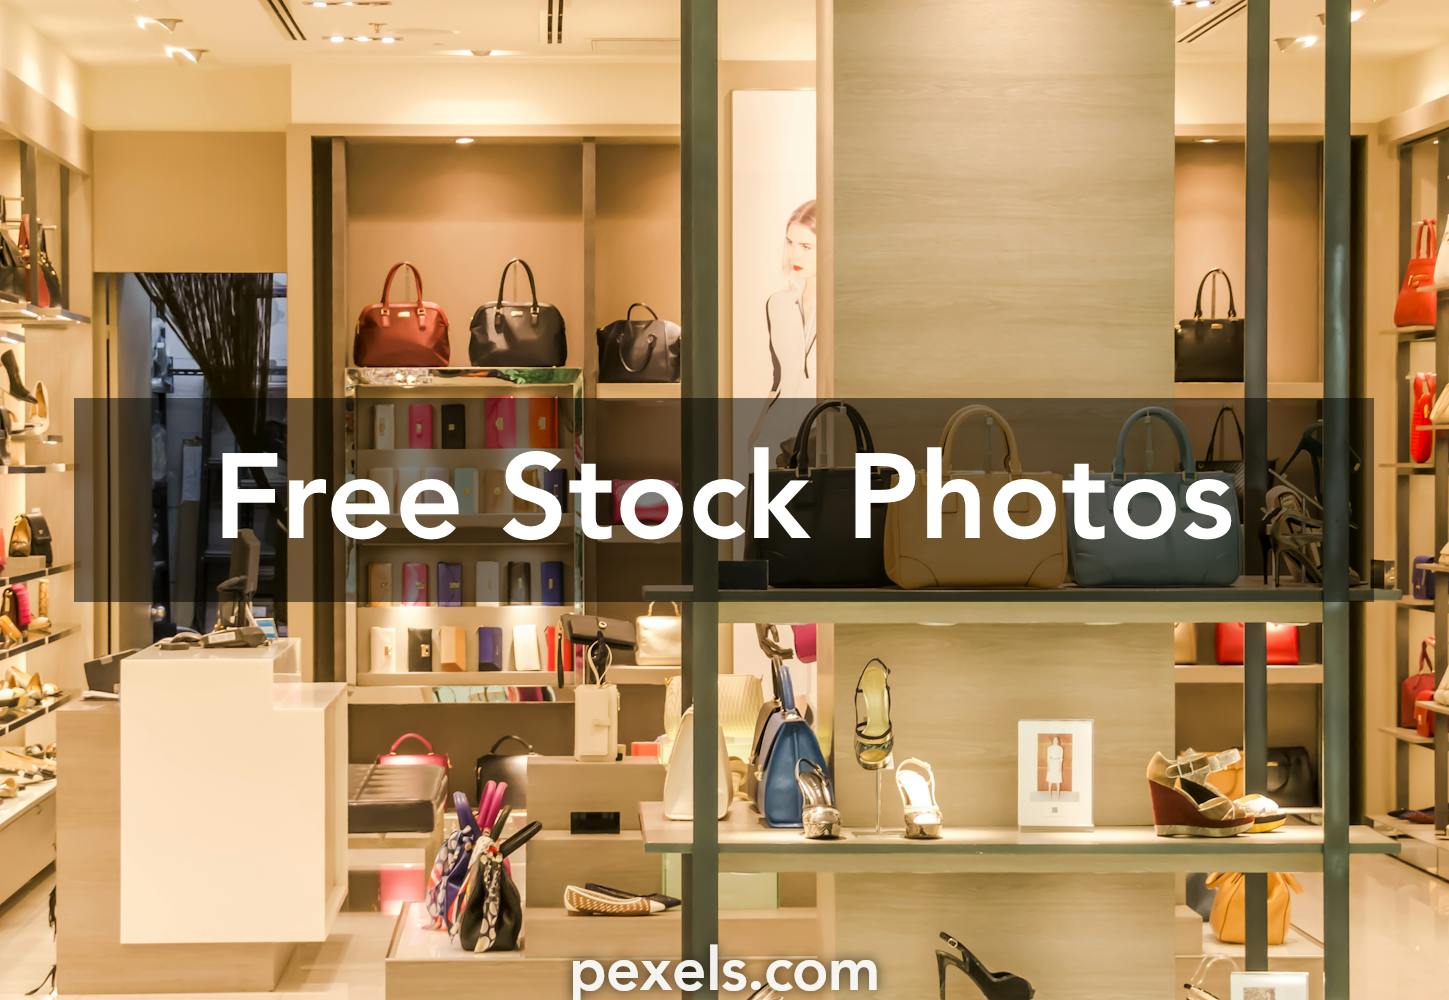 500+ Boutique Pictures  Download Free Images & Stock Photos on